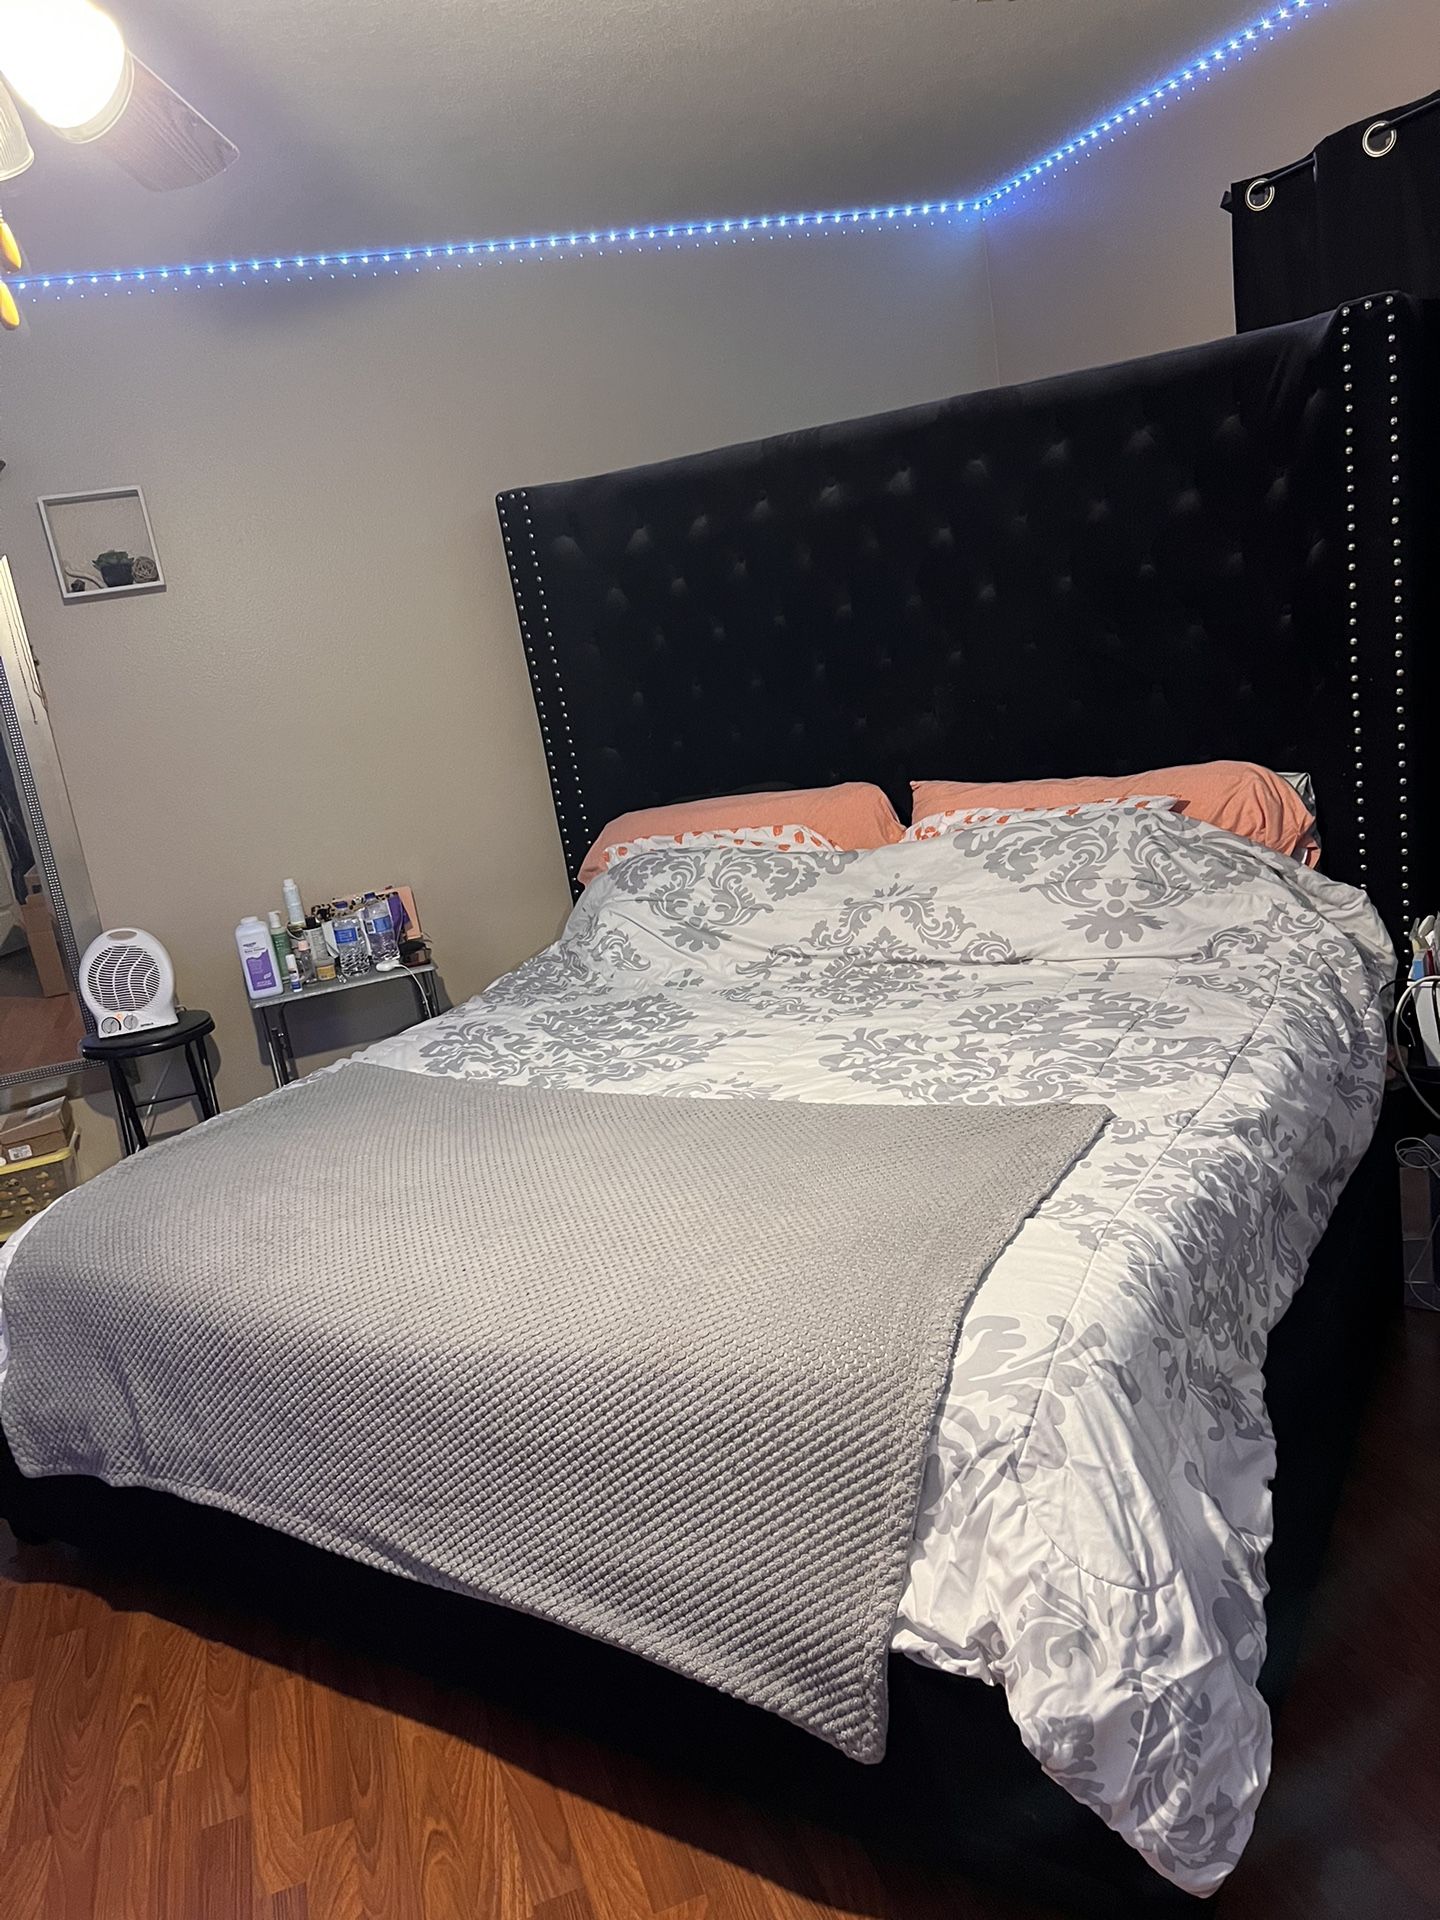 KING SIZE BED FRAME FOR SALE!!!